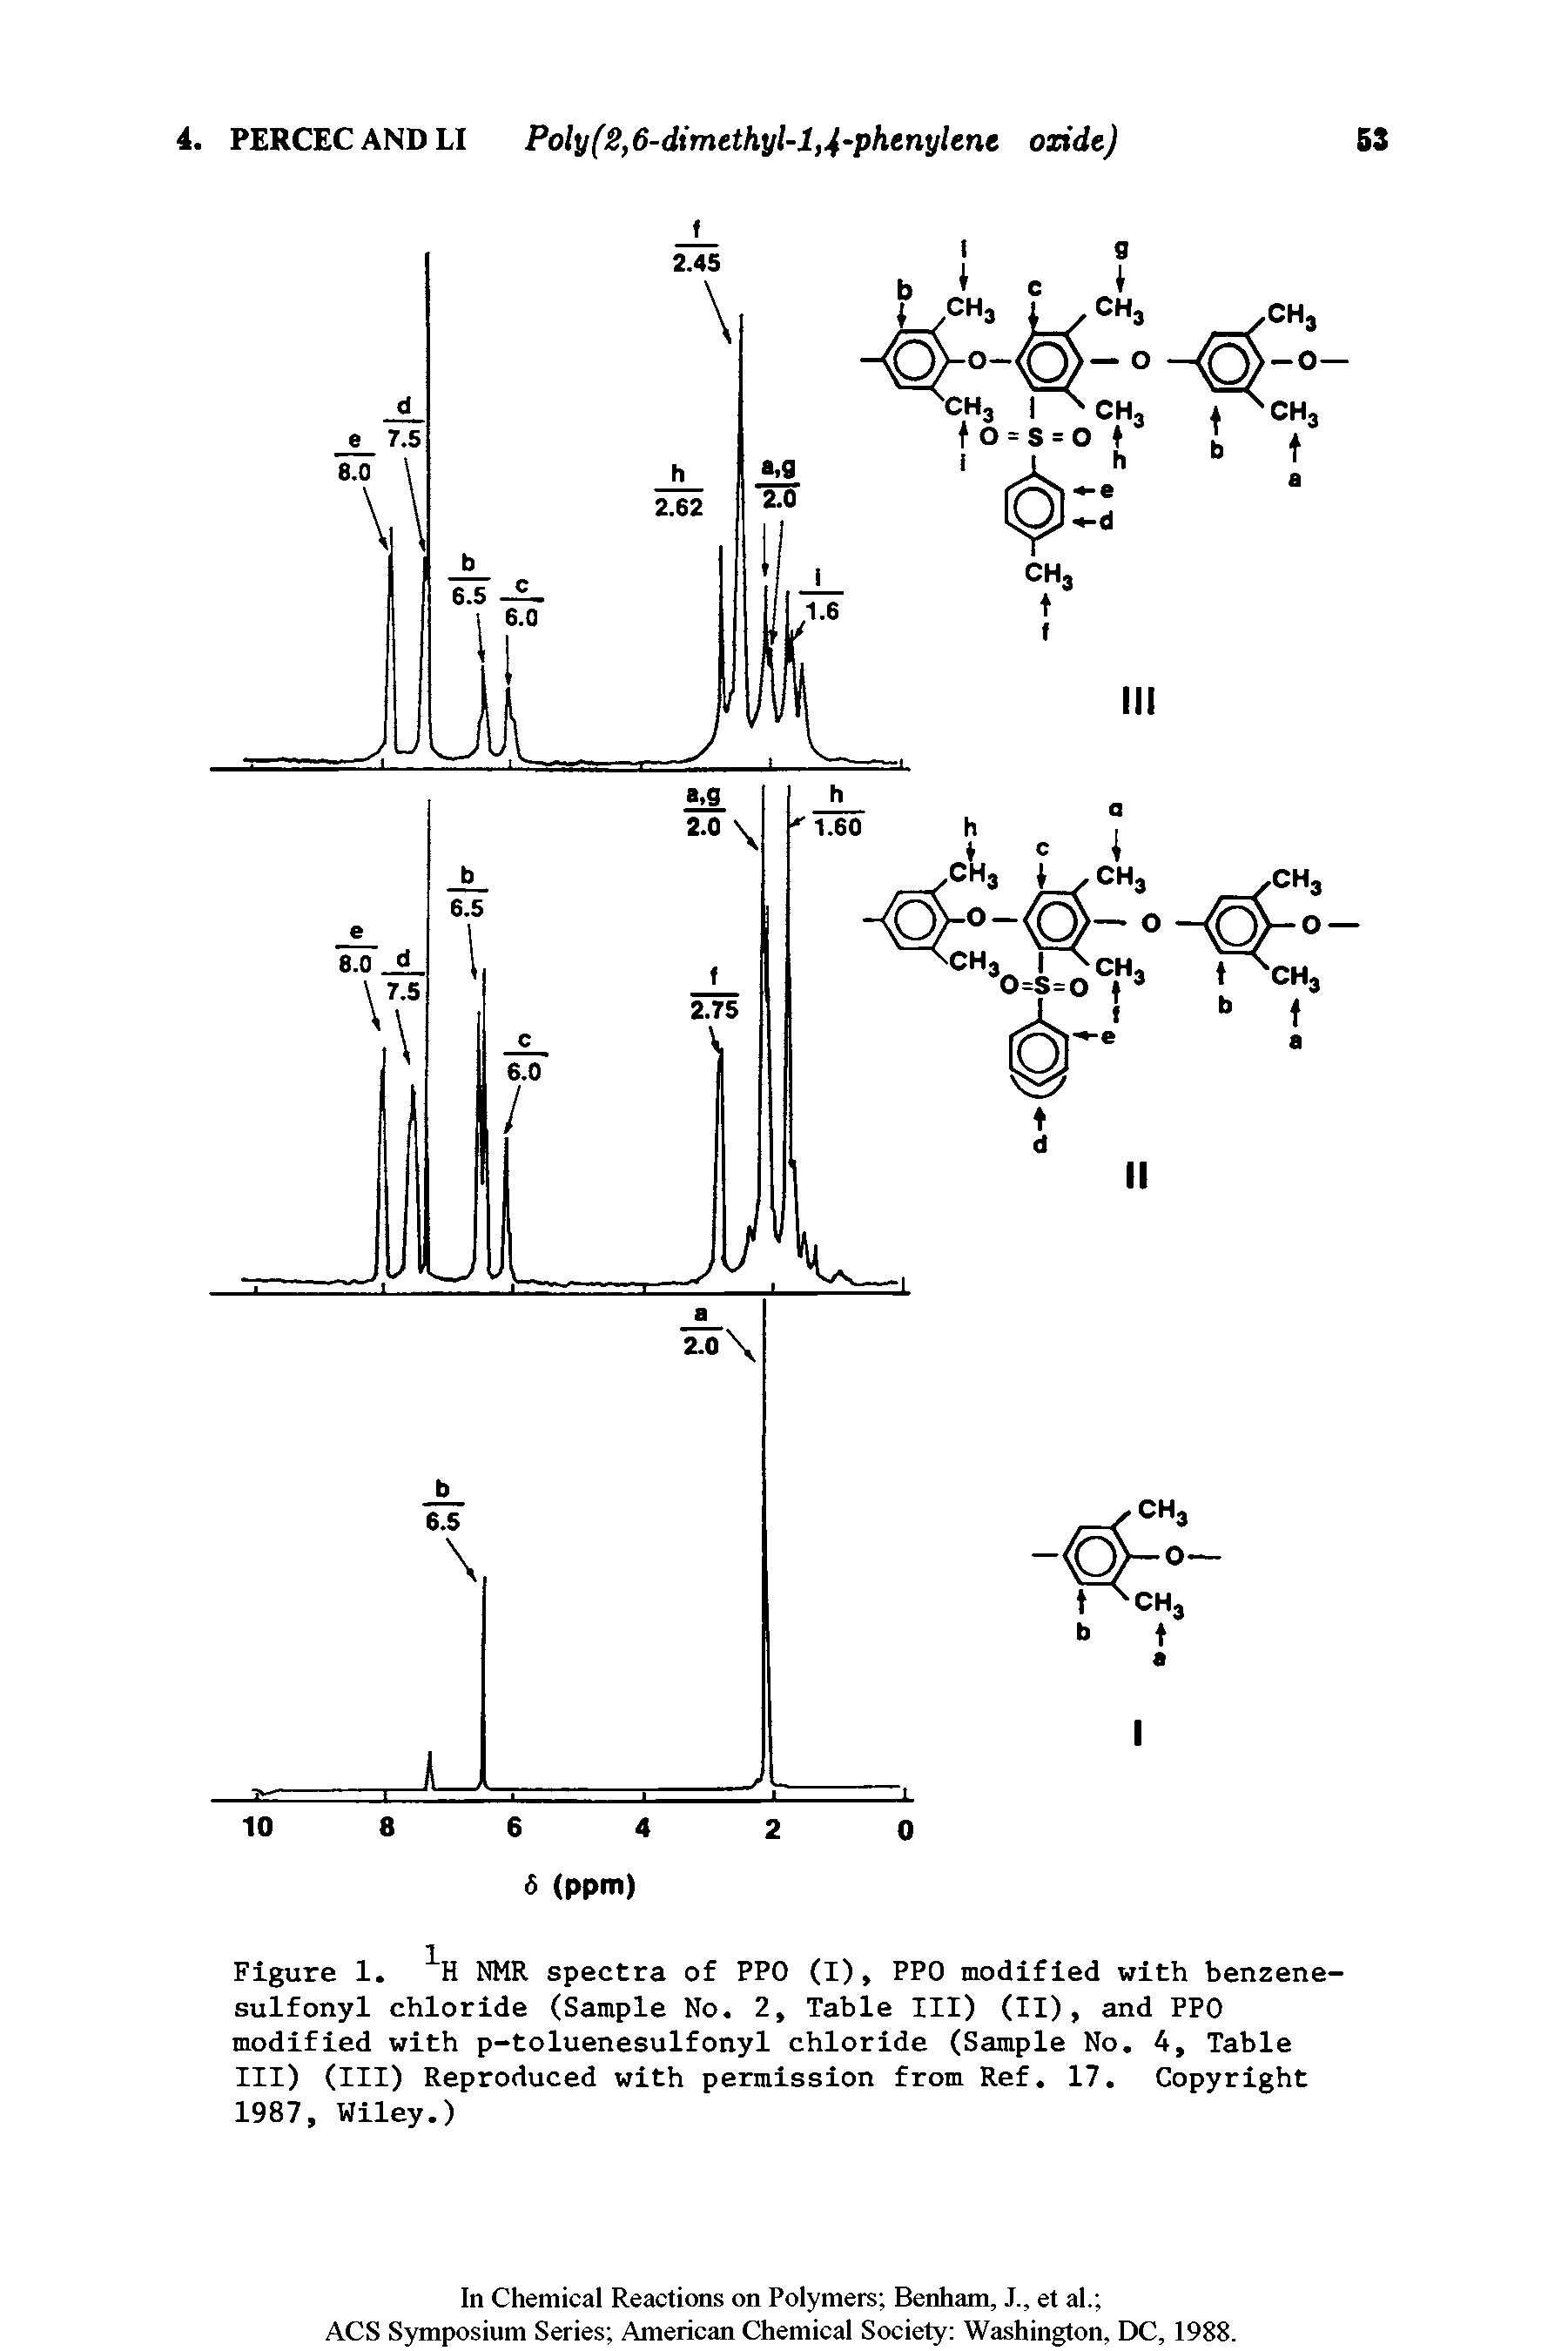 Figure 1. H NMR spectra of PPO (I), PPO modified with benzene-sulfonyl chloride (Sample No. 2, Table III) (II), and PPO modified with p-toluenesulfonyl chloride (Sample No. 4, Table III) (III) Reproduced with permission from Ref. 17. Copyright 1987, Wiley.)...